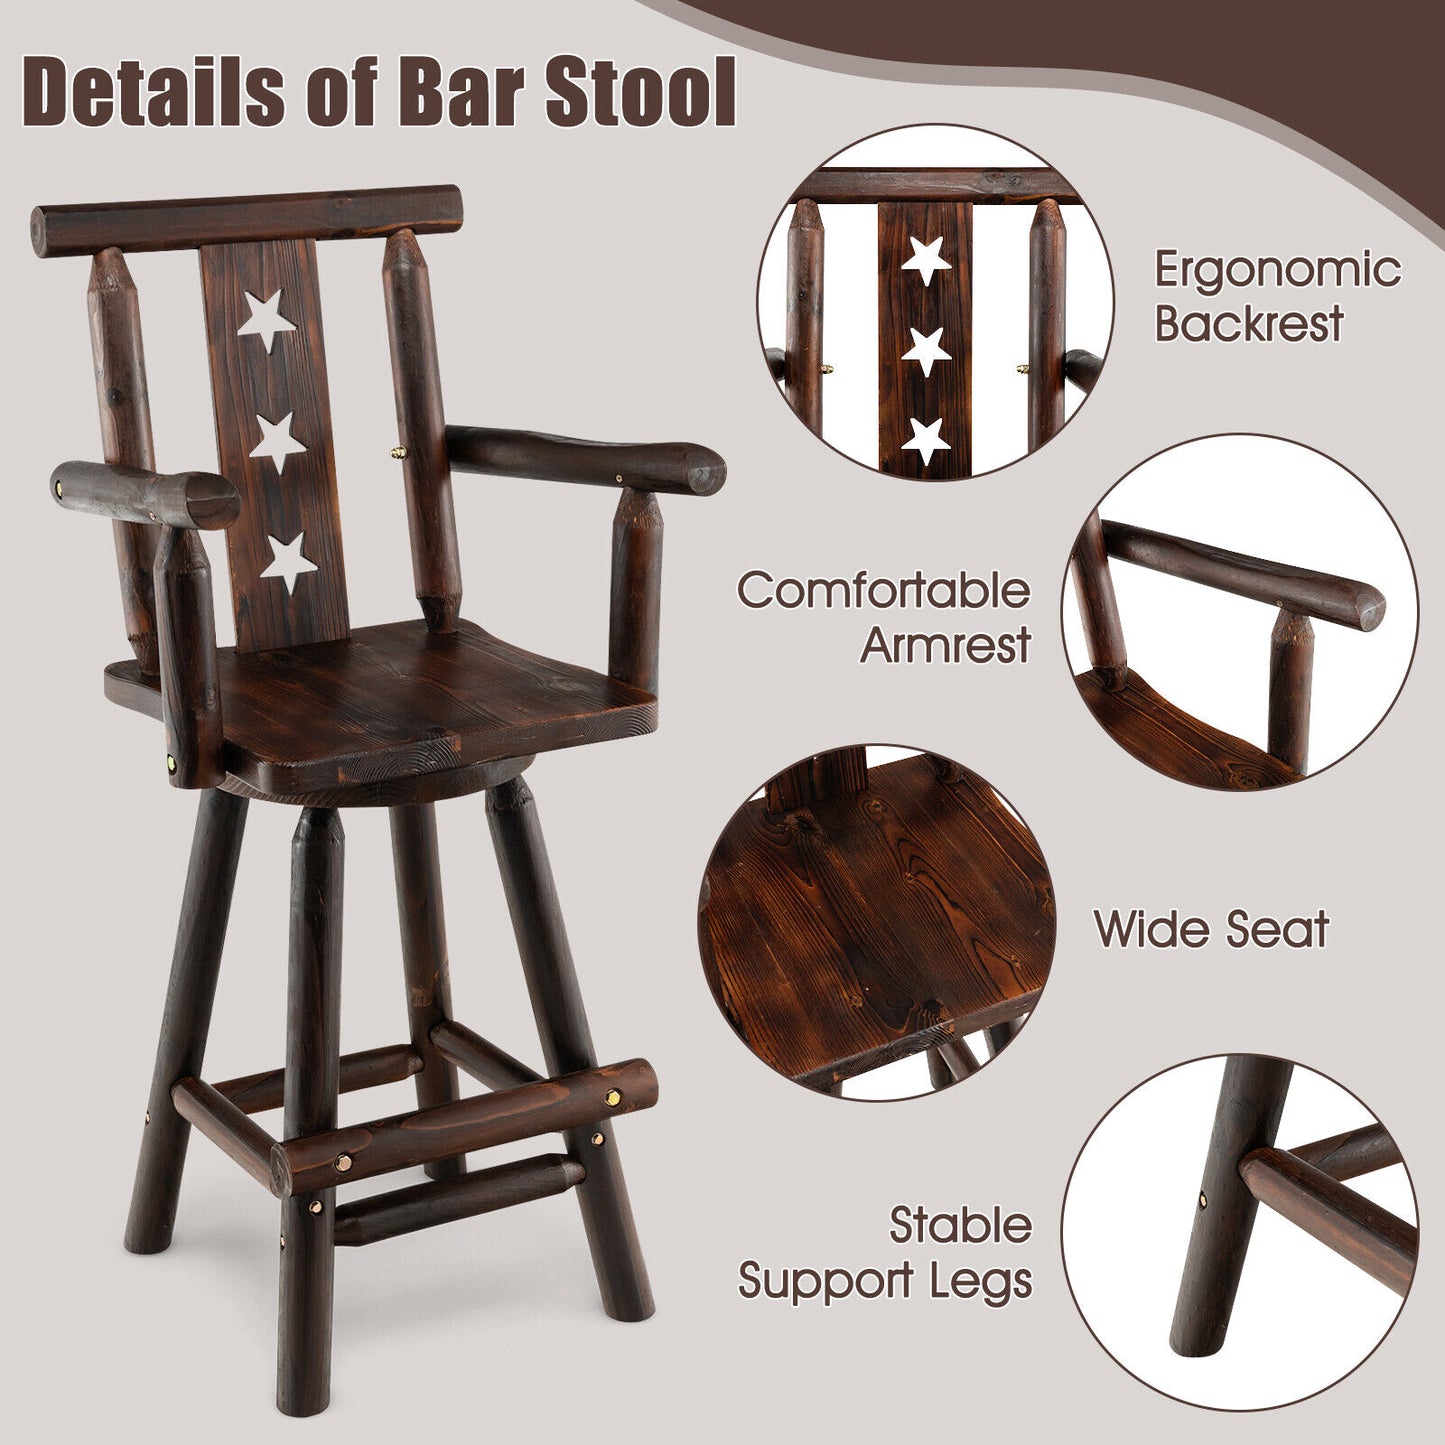 Vintage Brown Wooden Swivel Bar Stool for Kitchen or Patio